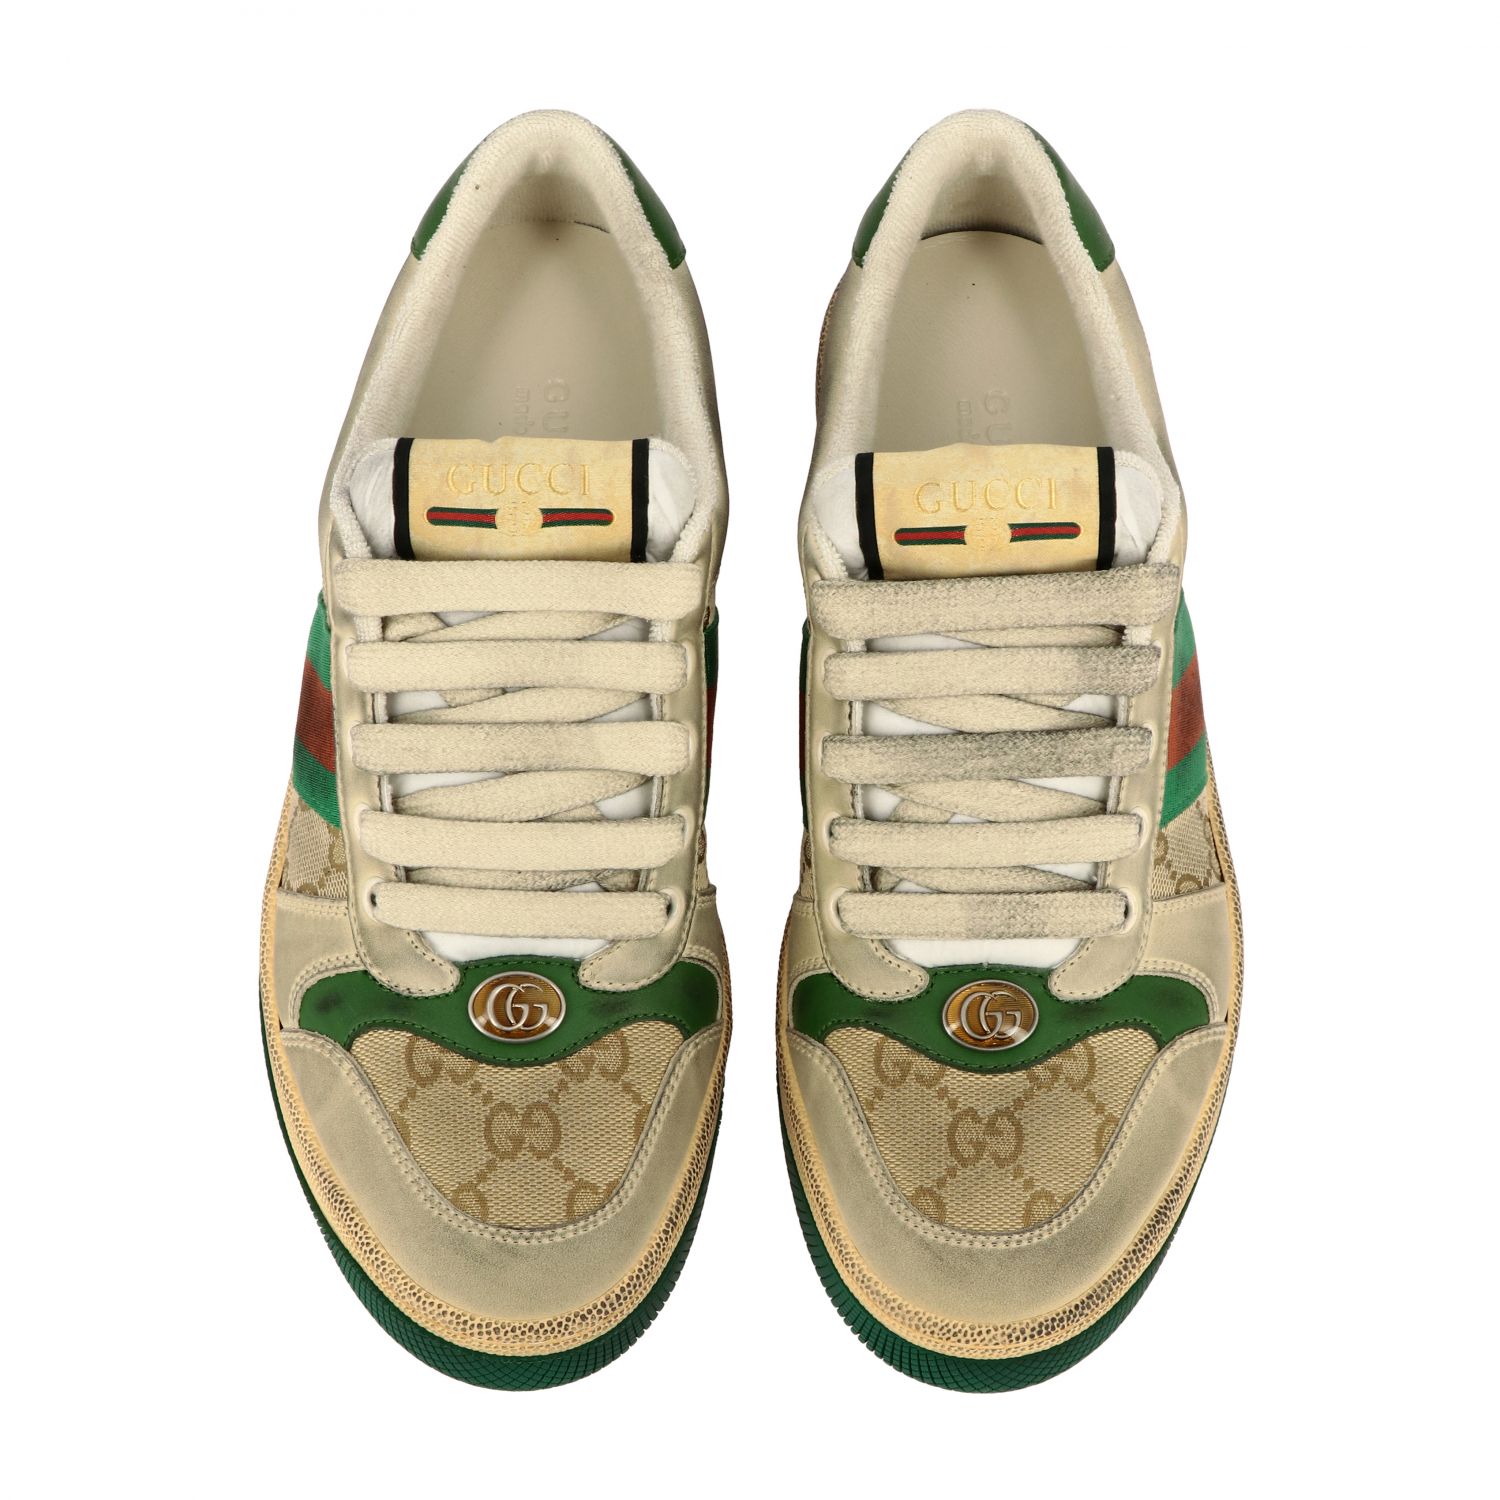 GUCCI: Screener sneakers in GG Supreme canvas and leather with web ...